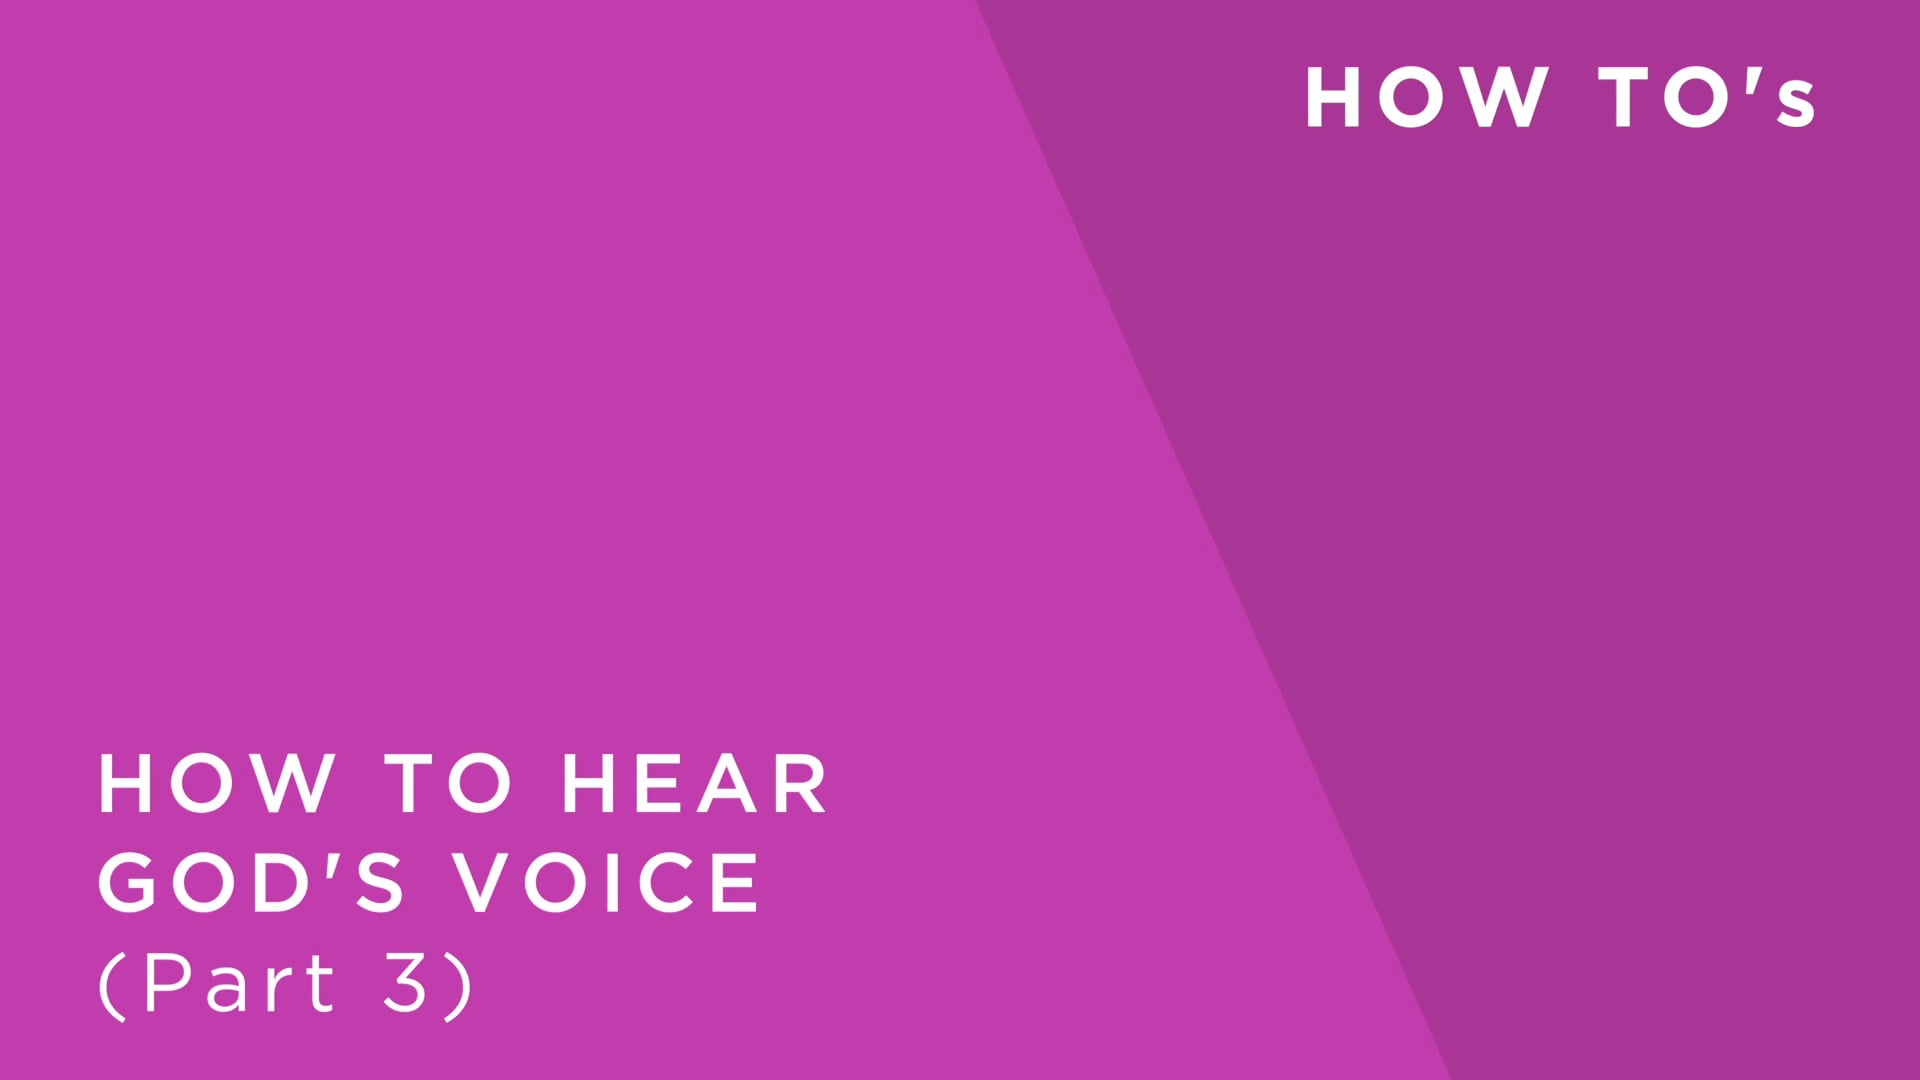 How to Hear God's Voice Part 3